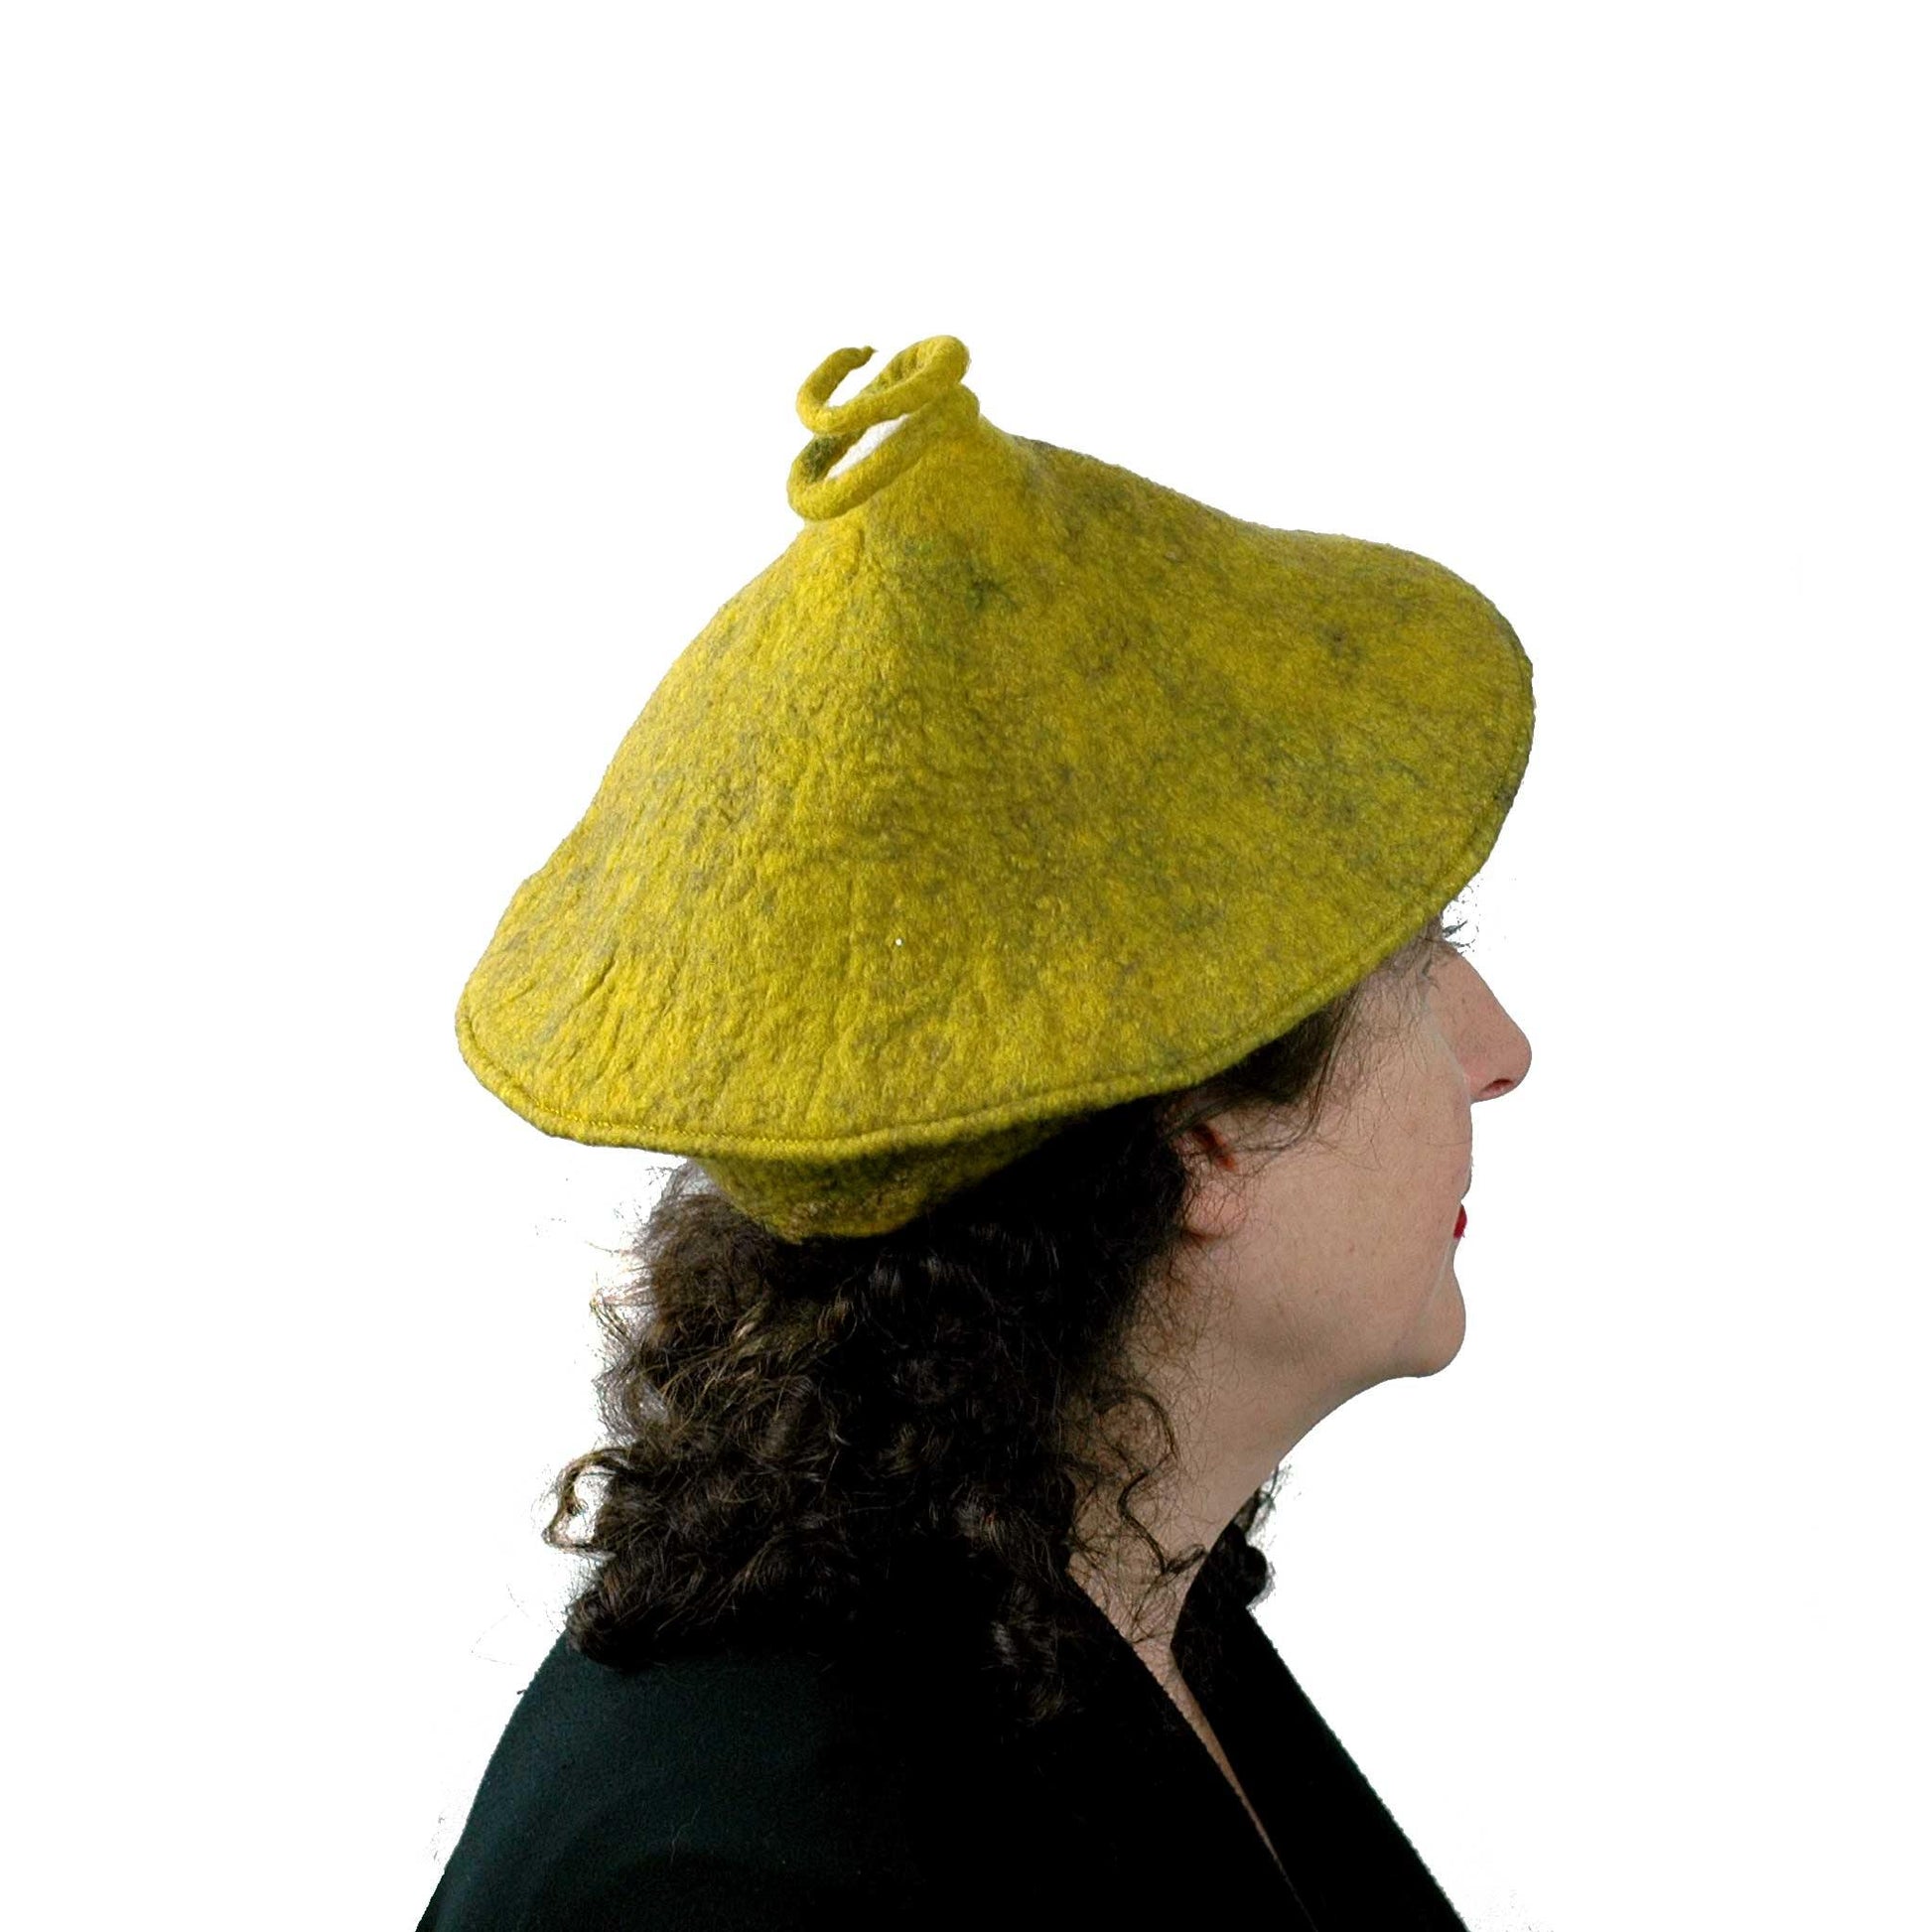 Conical Hat in Mustard Yellow - Medium Small Size  - side view